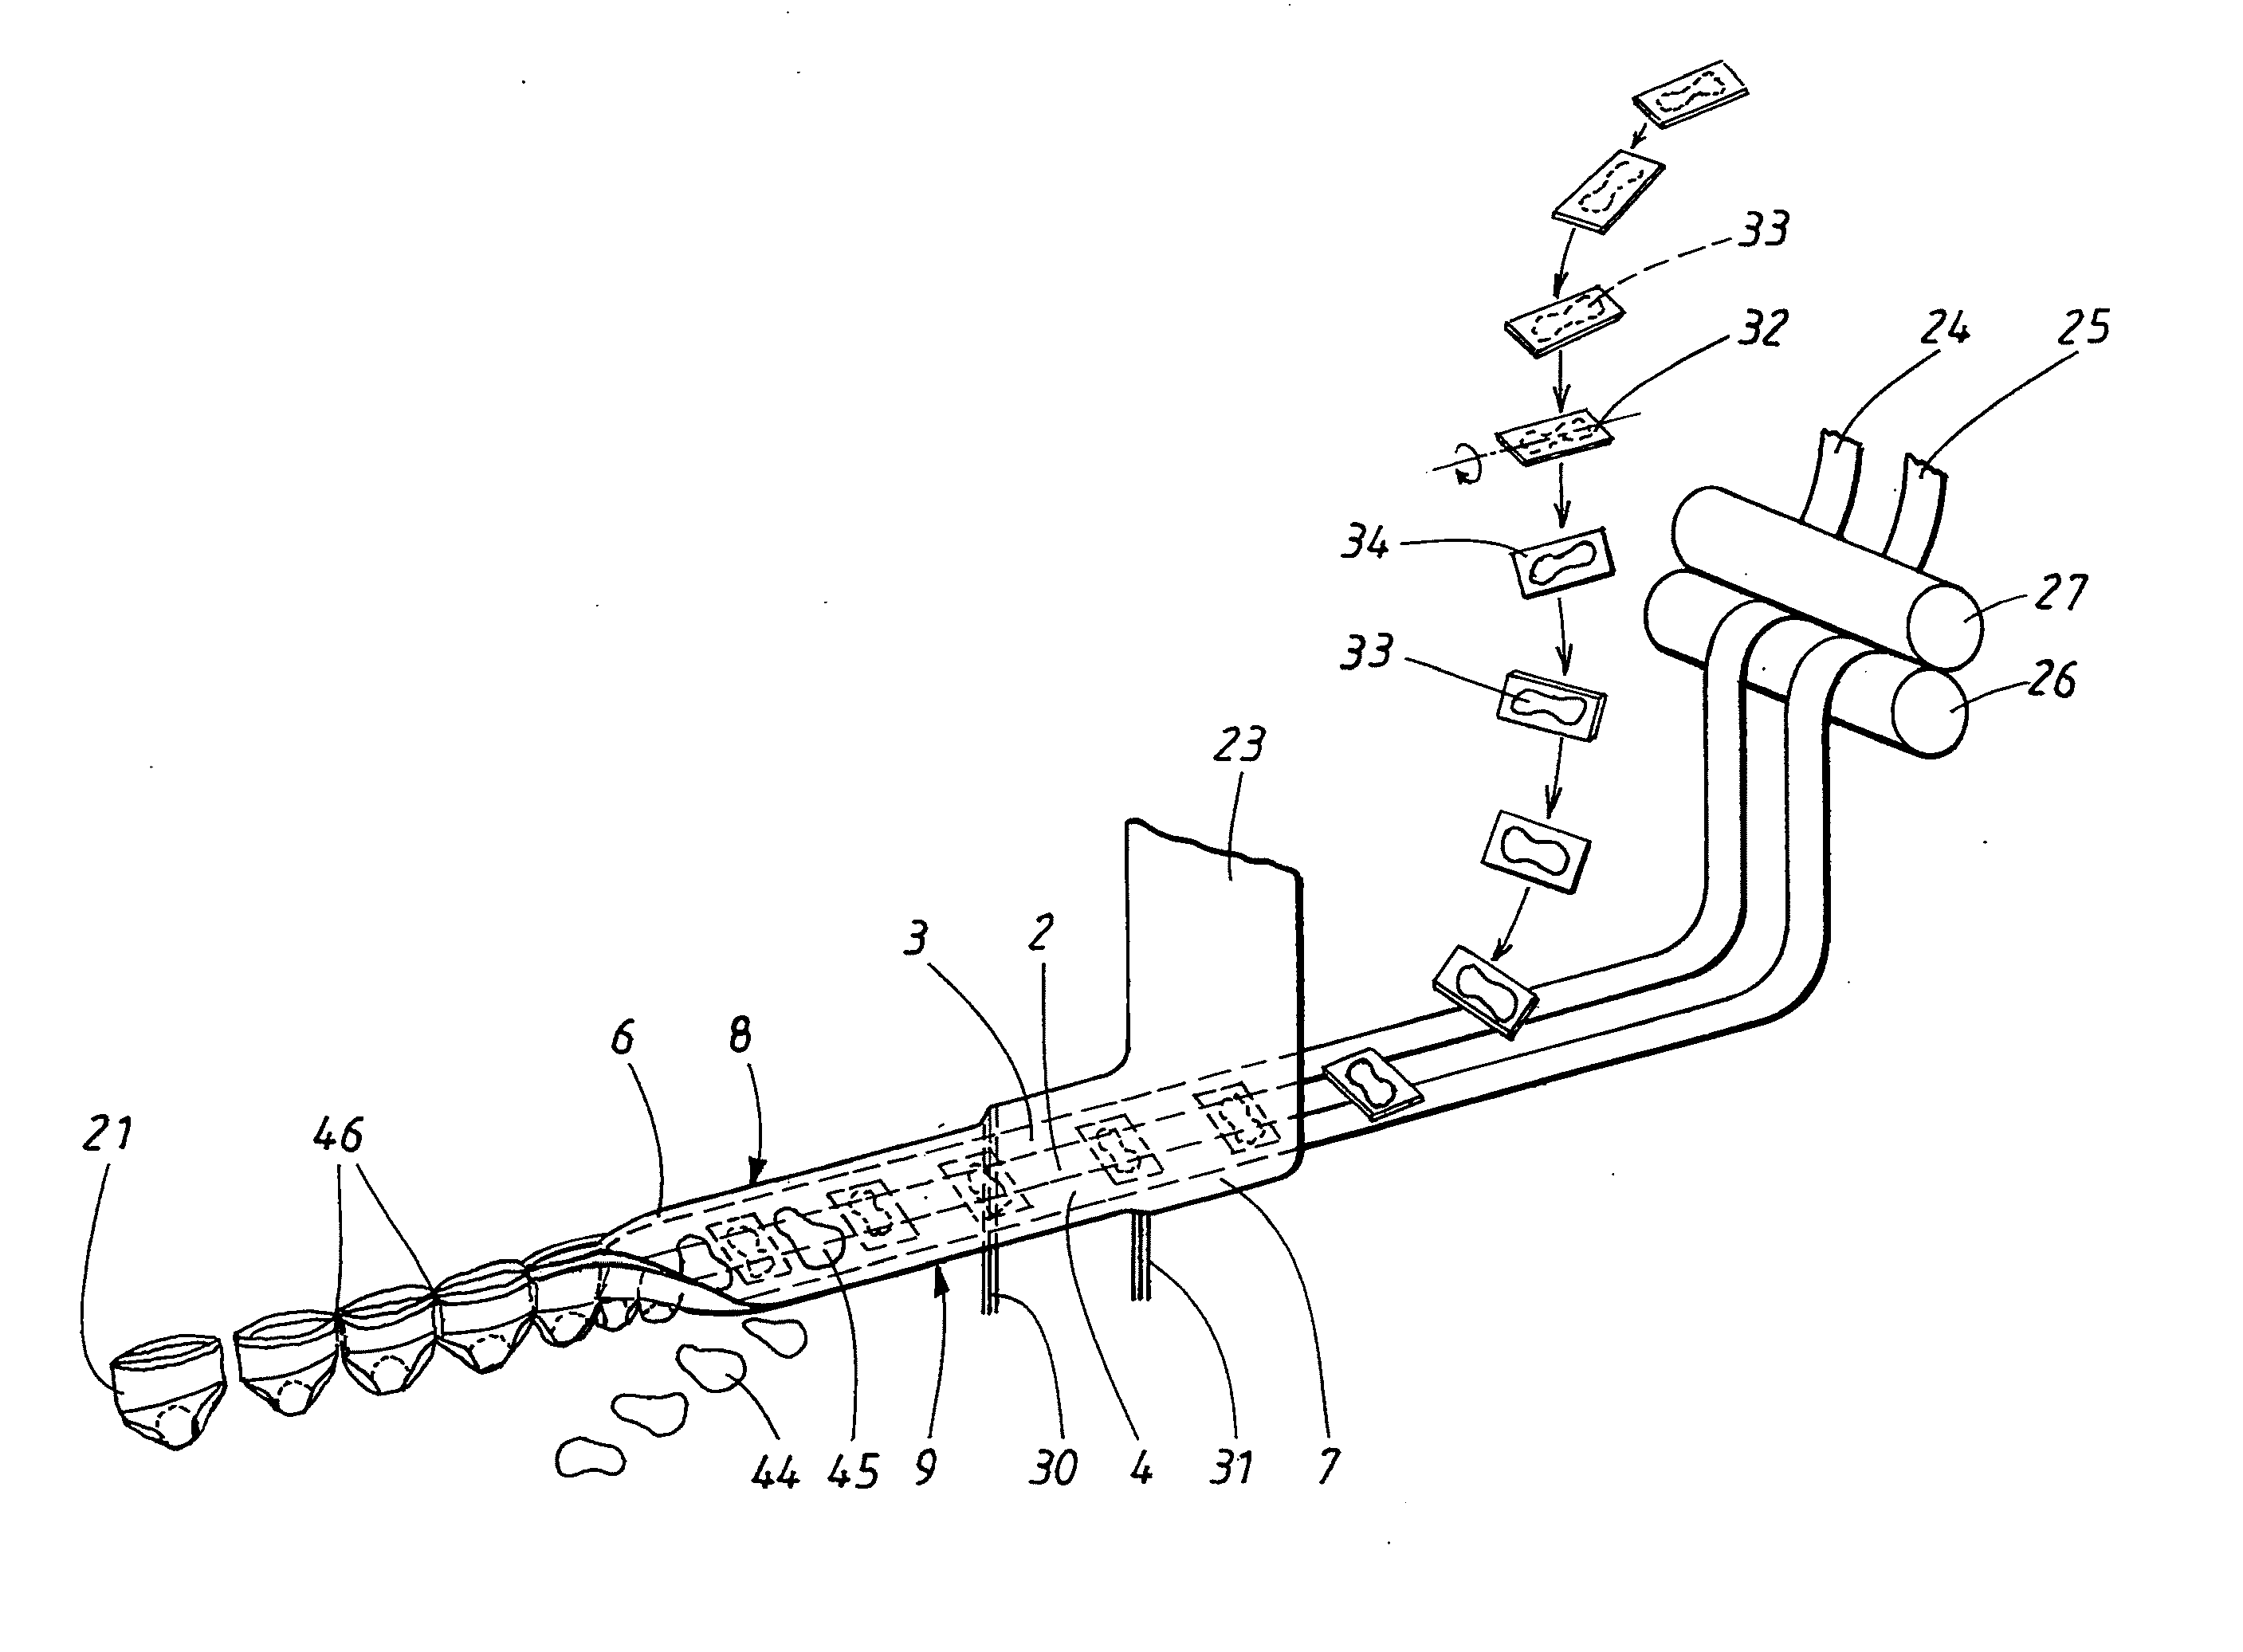 Method of producing an absorbent garment, and an absorbent garment produced according to the method